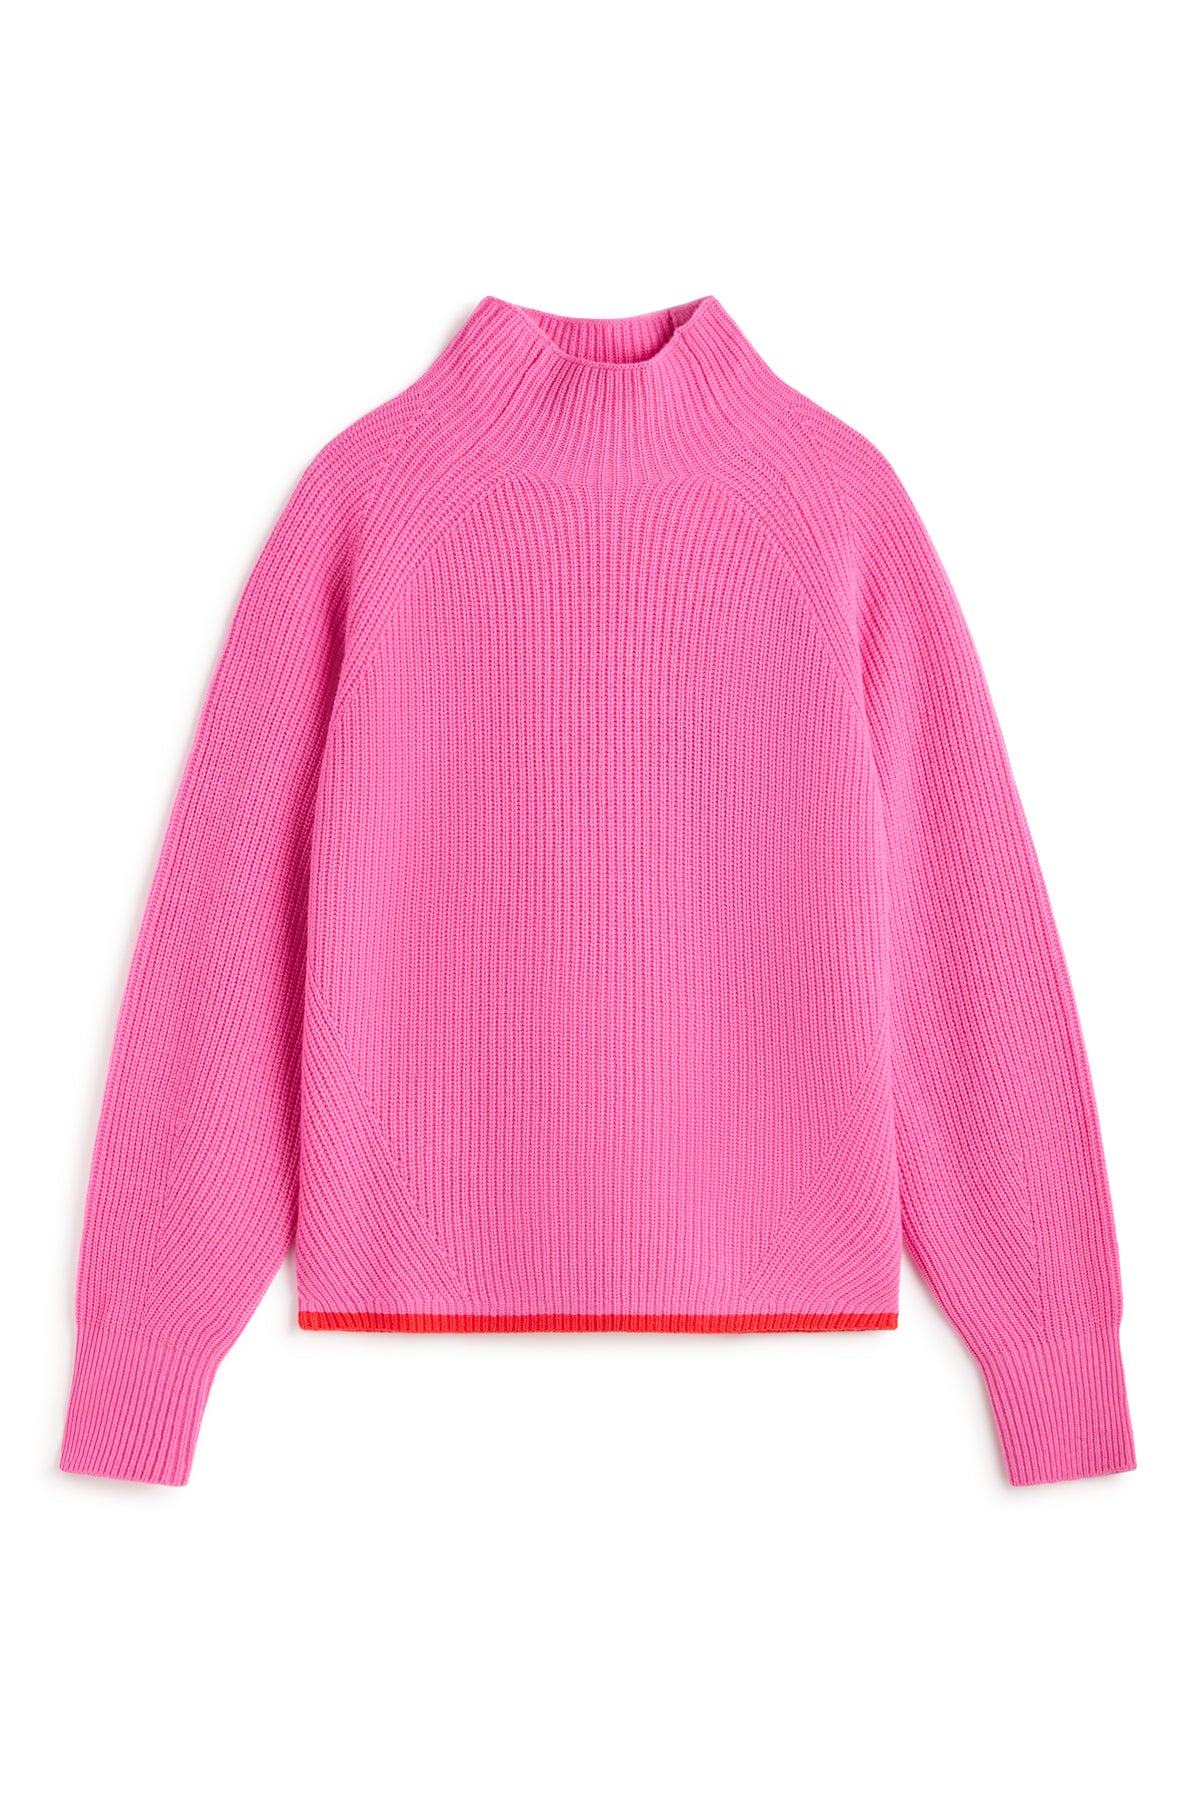 PINK GINKO KNITTED JUMPER  